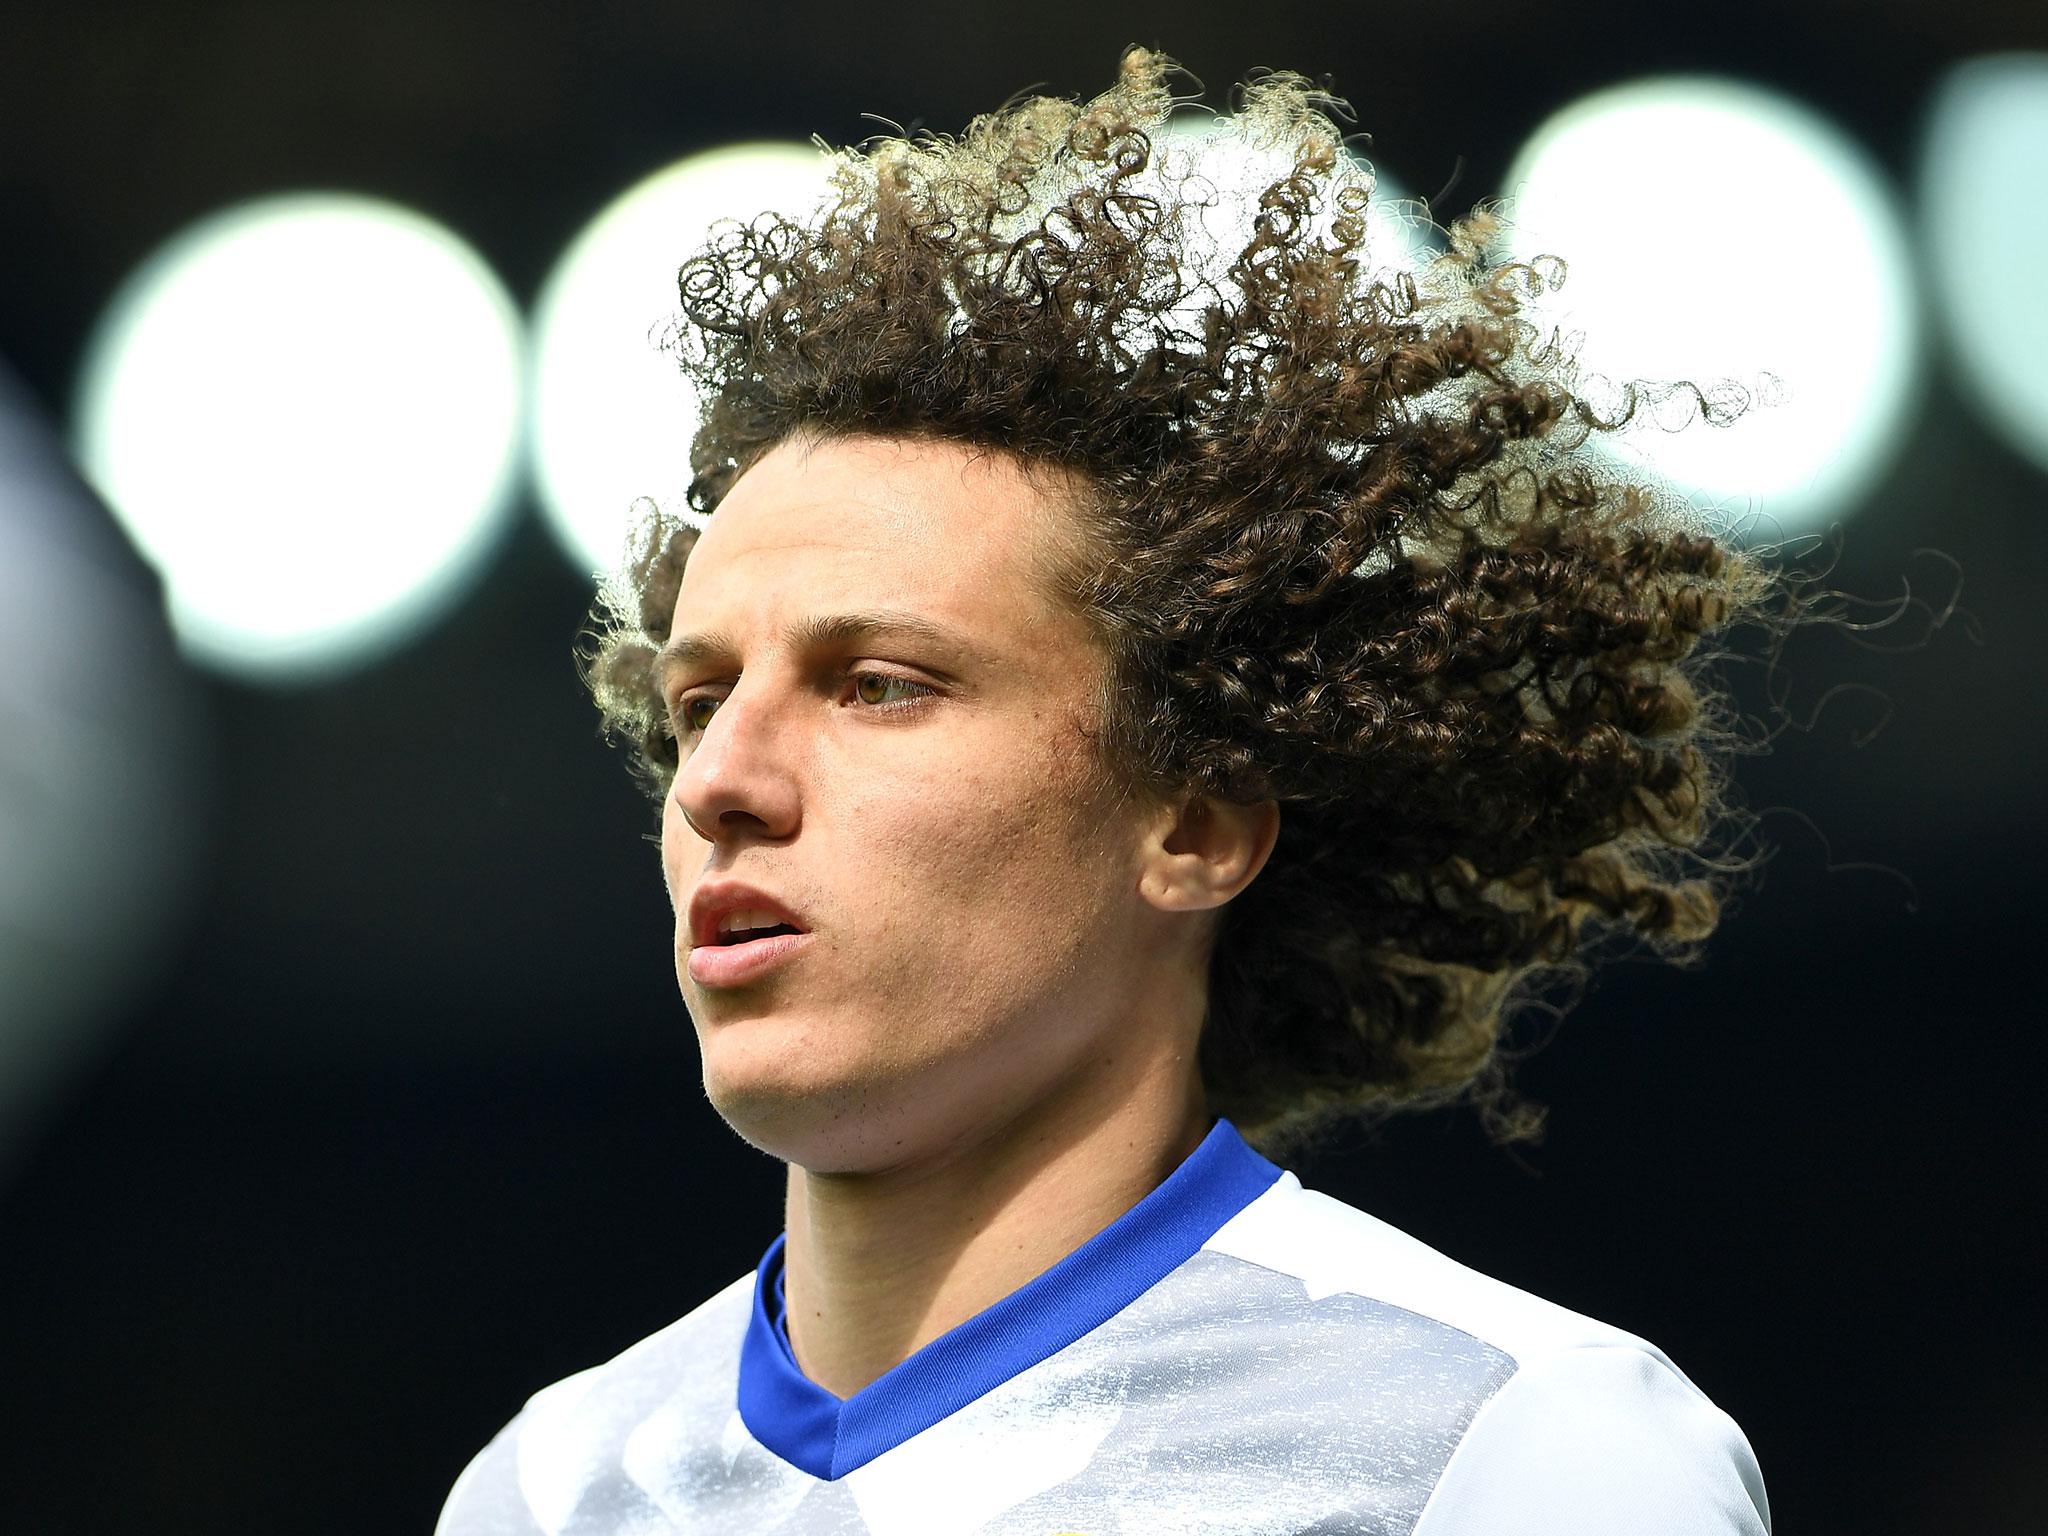 David Luiz has an 'obsession' with winning the Premier League